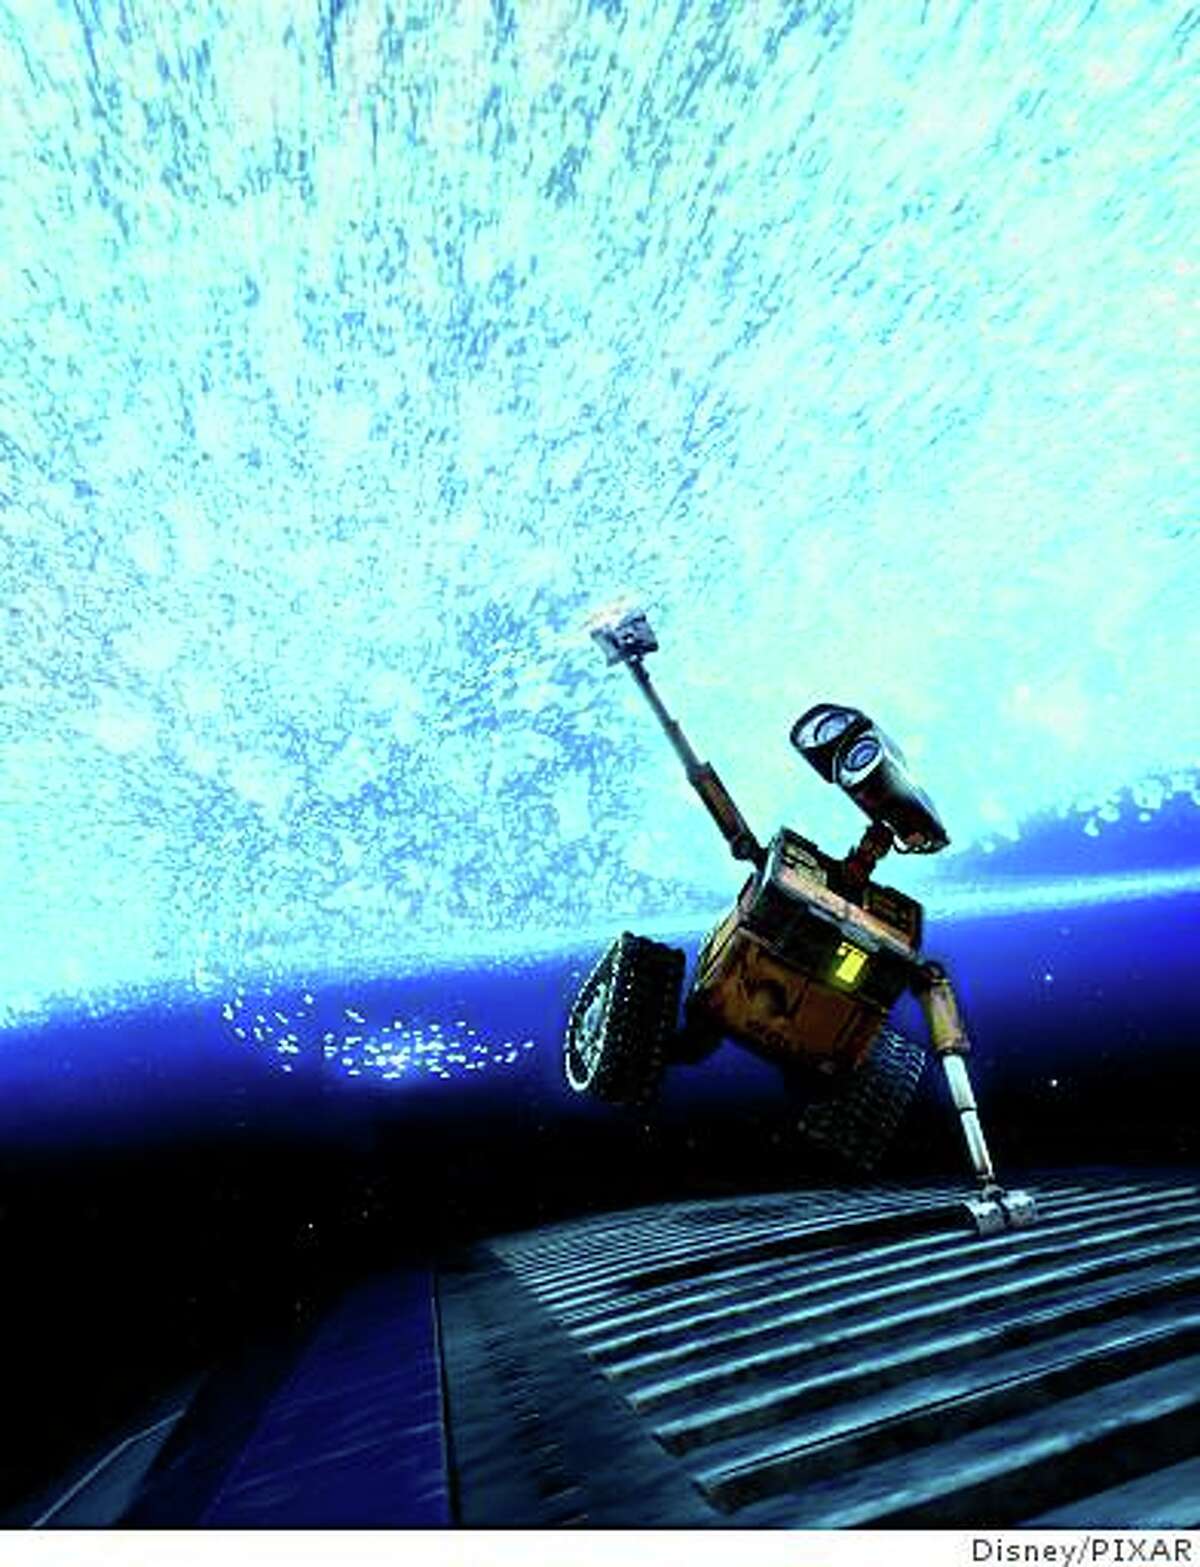 Disney/PIXAR's animated feature, Wall-E is the story of one robot's comic adventures as he chases his dream across the galaxy.